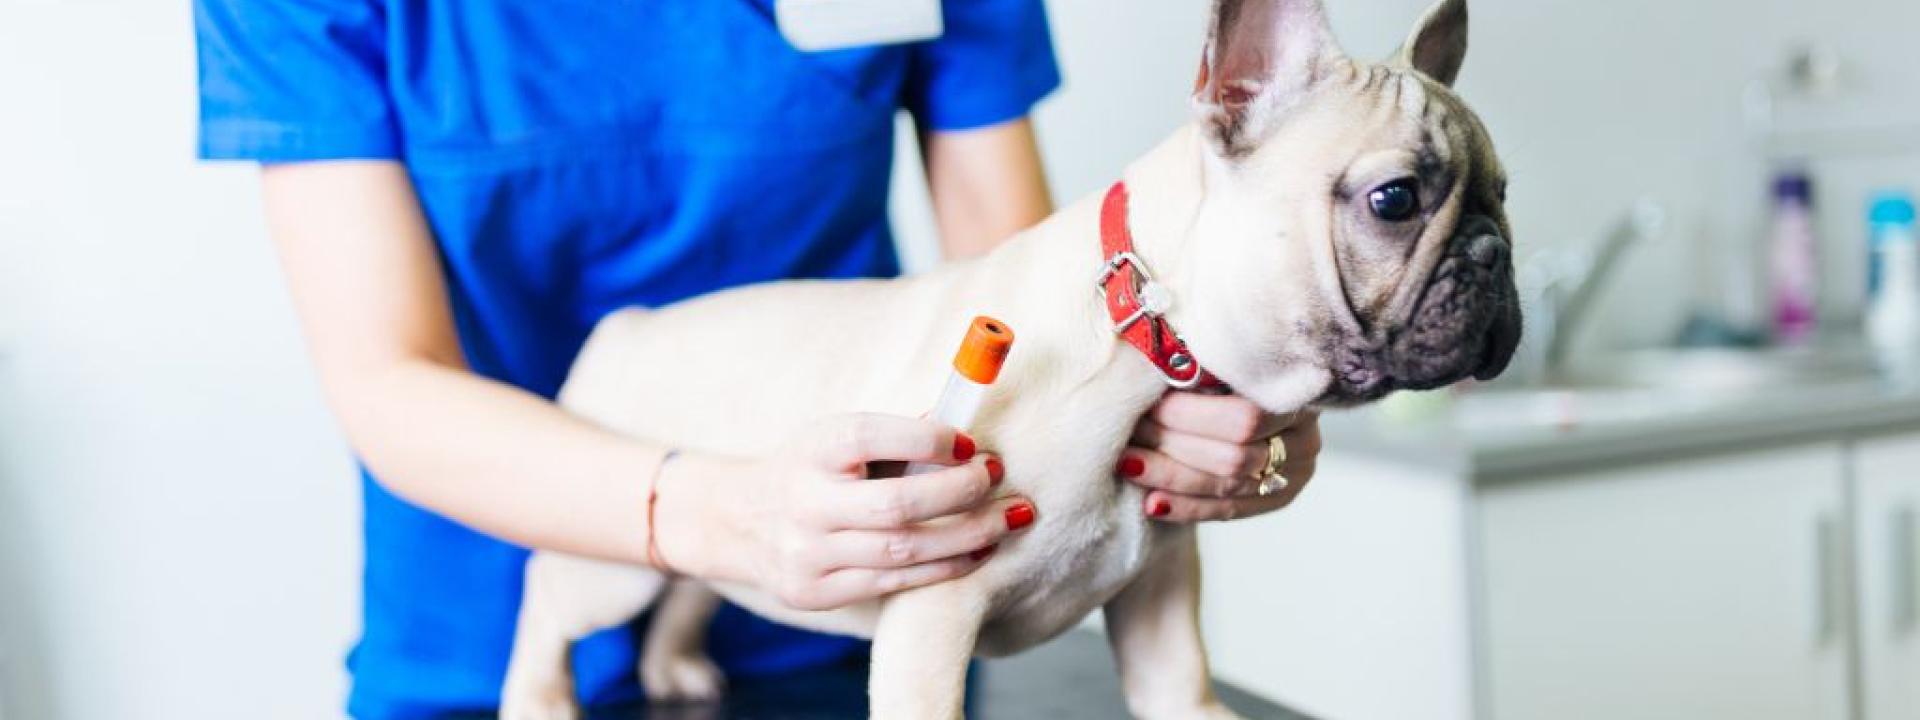 French bulldog puppy at veterinarian for lab tests